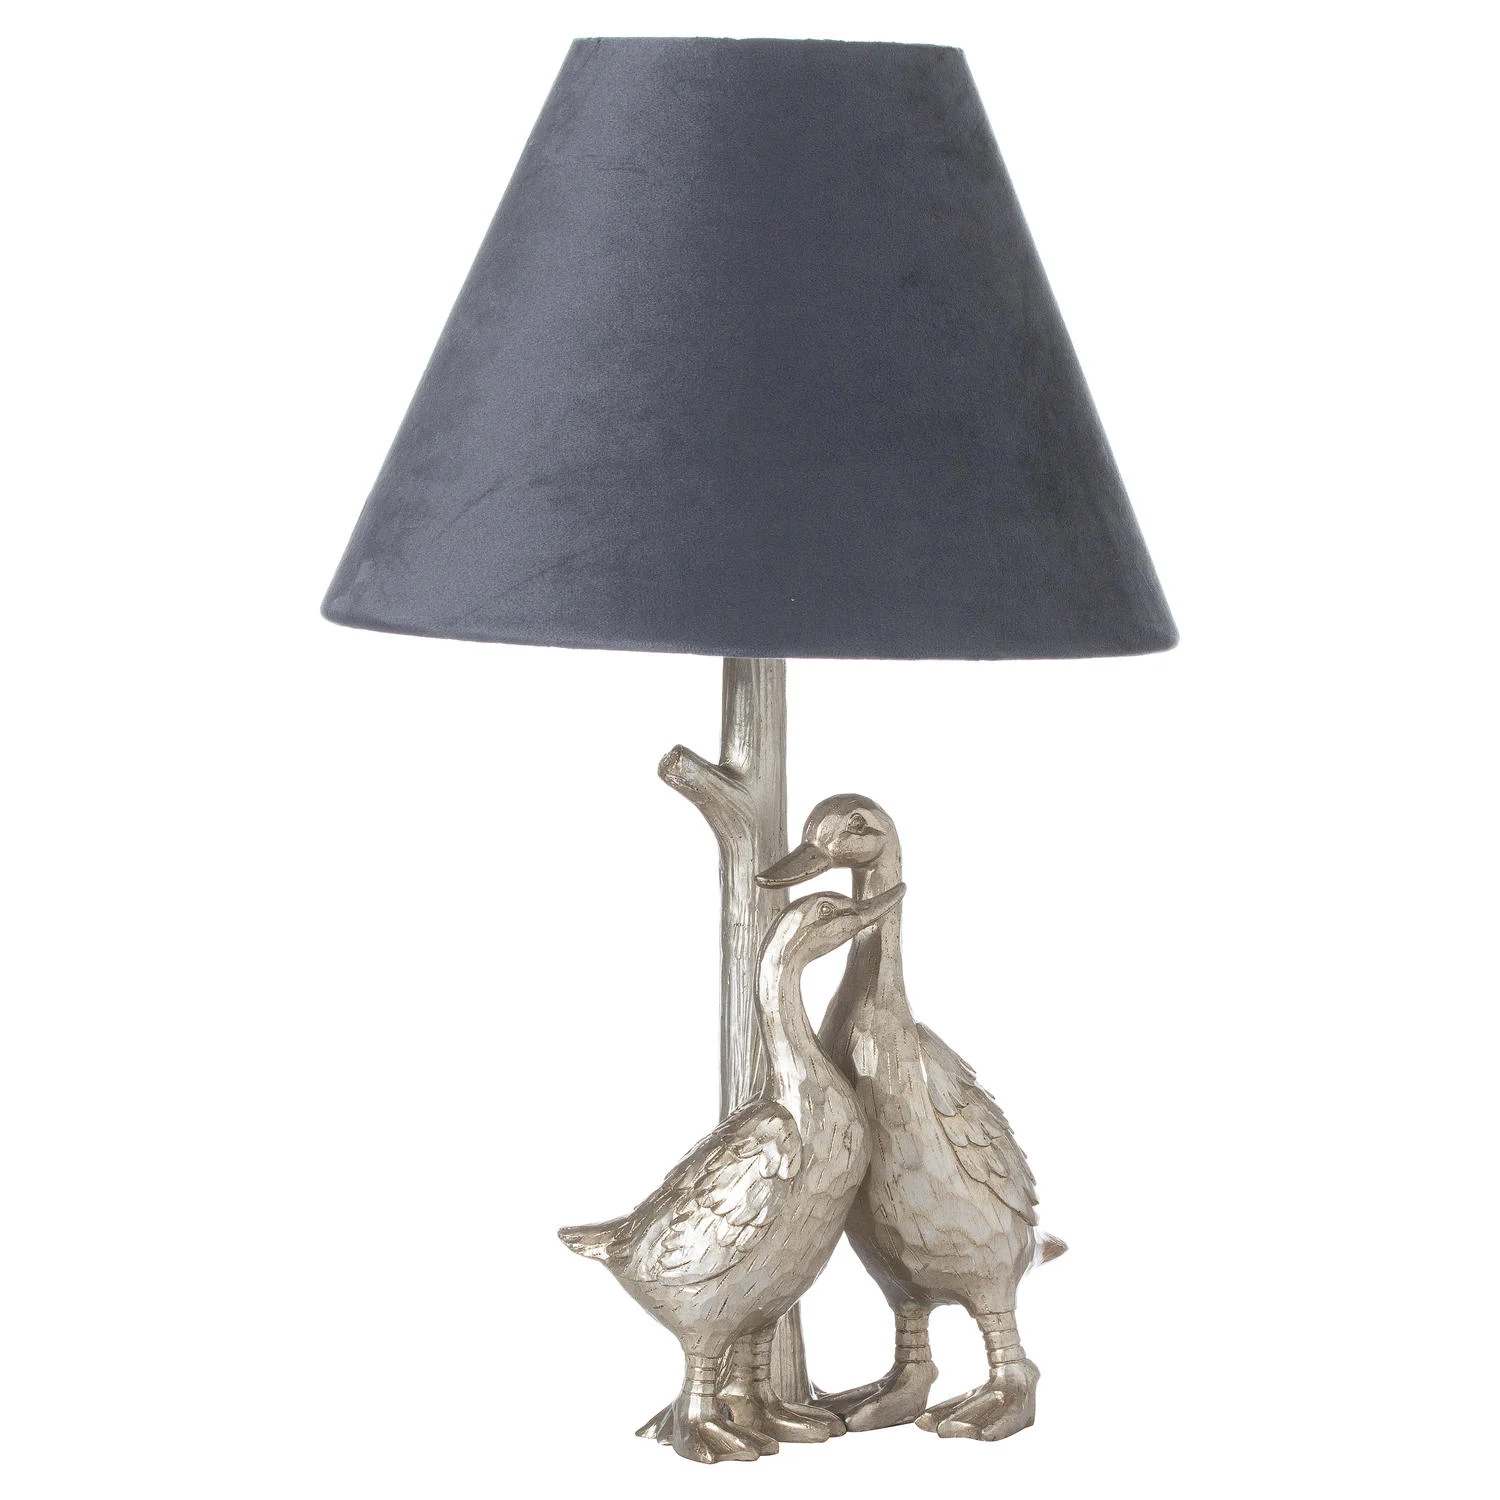 Silver Hare Table Lamp With Grey Velvet Shade Ornamental Lamp Statement Piece